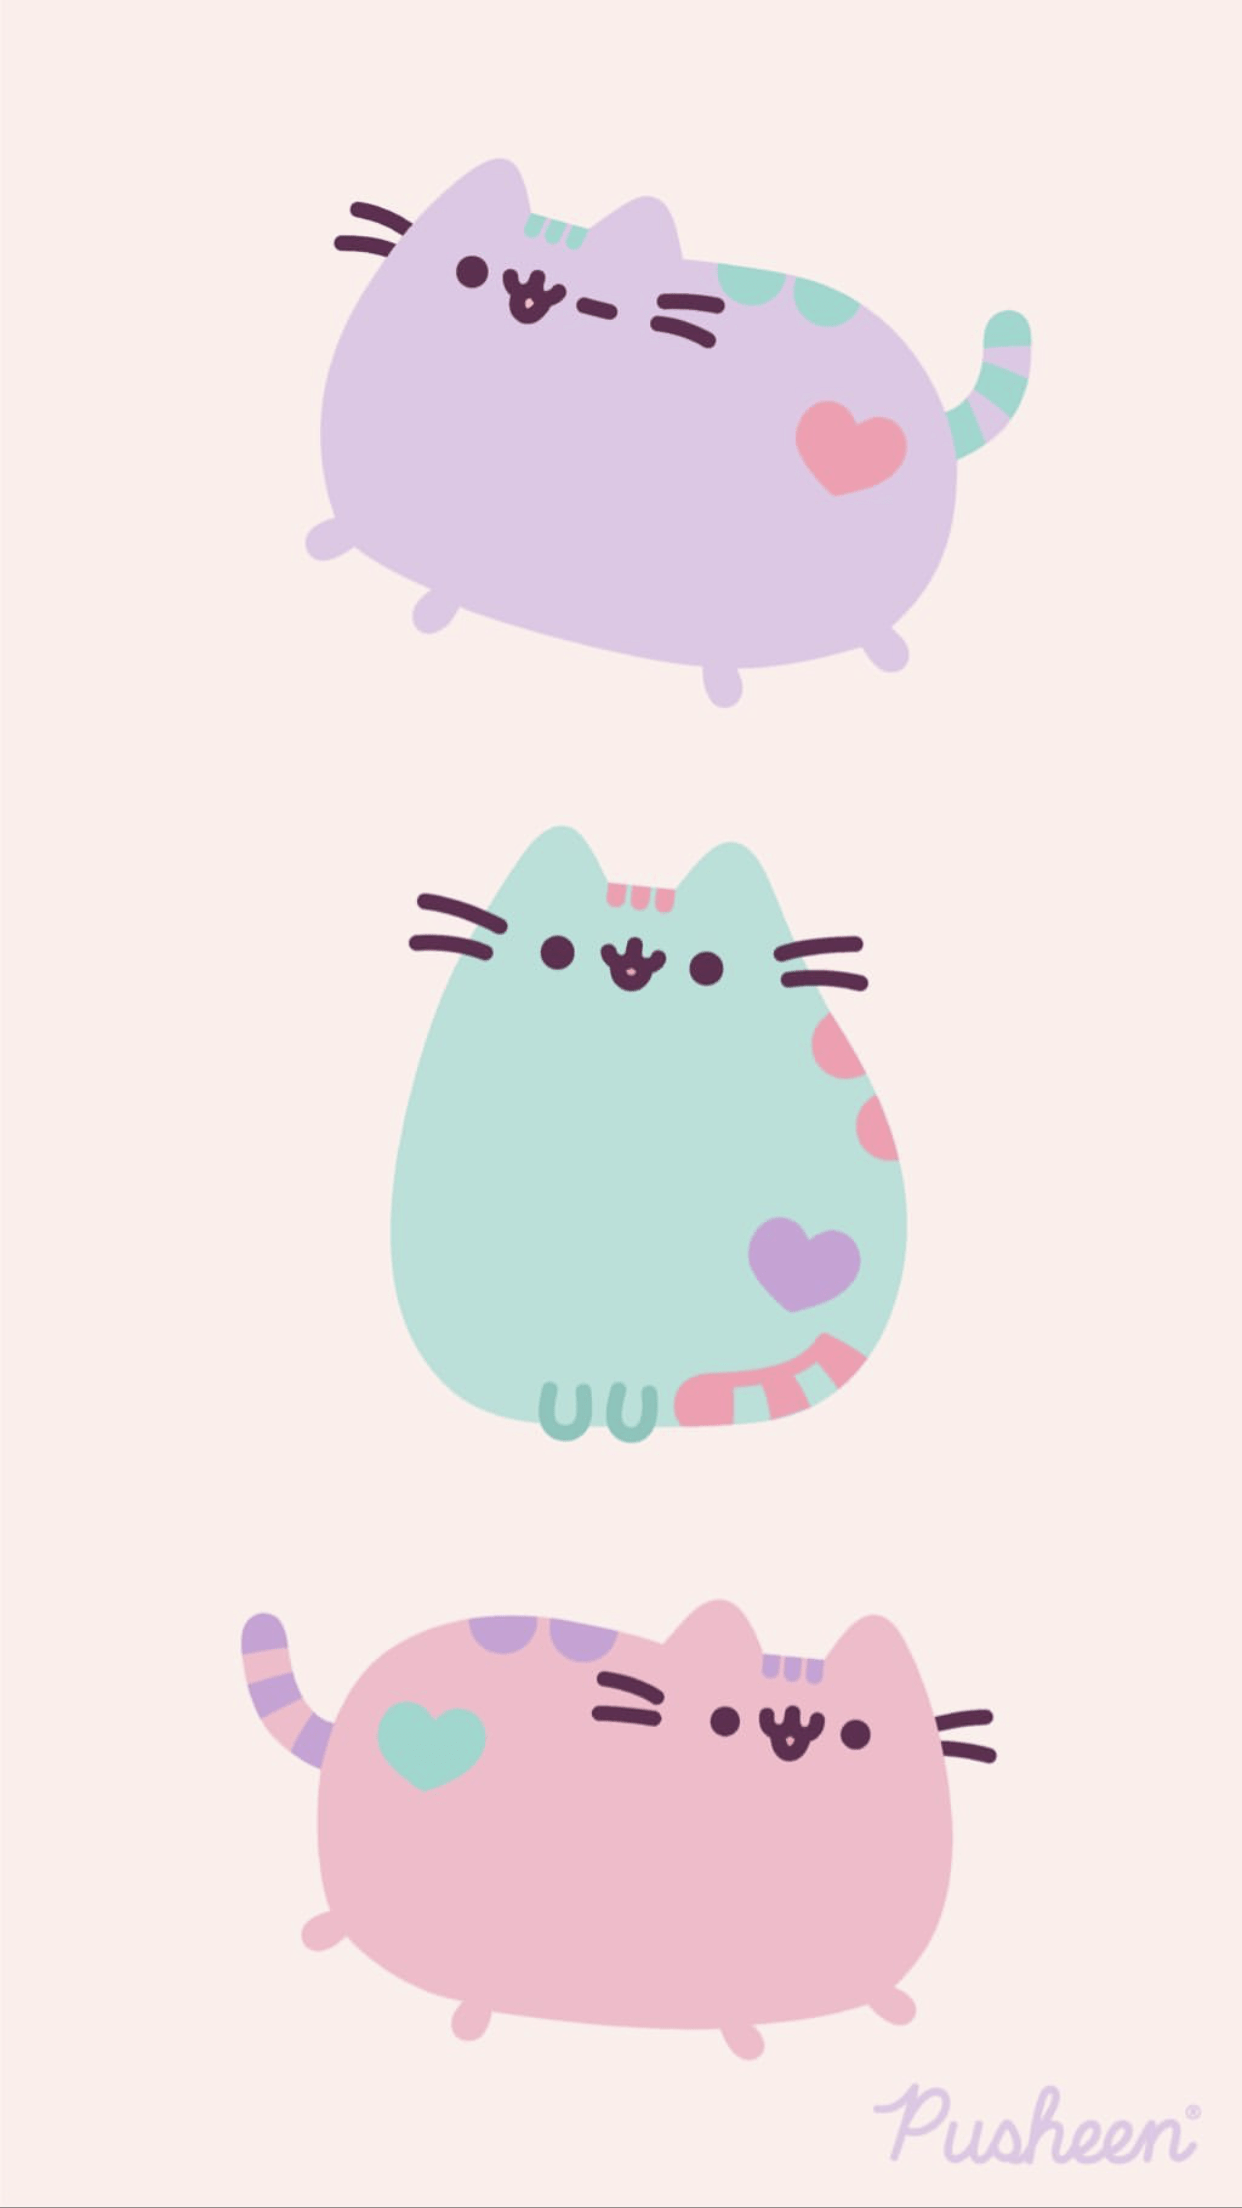 A cute cat with hearts on its head - Pusheen